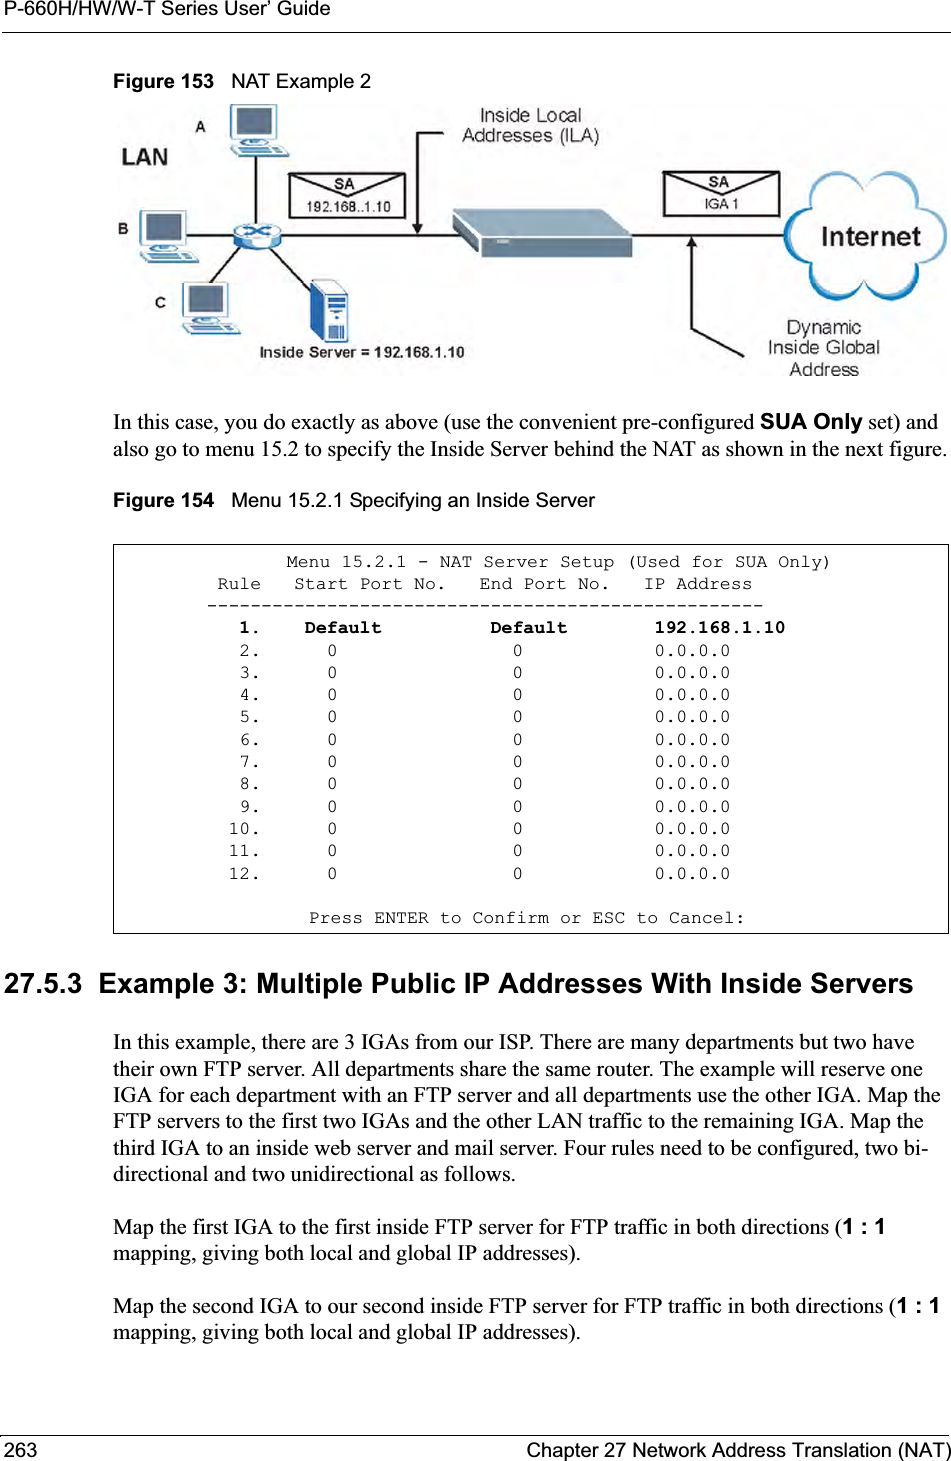 P-660H/HW/W-T Series User’ Guide263 Chapter 27 Network Address Translation (NAT)Figure 153   NAT Example 2In this case, you do exactly as above (use the convenient pre-configured SUA Only set) and also go to menu 15.2 to specify the Inside Server behind the NAT as shown in the next figure.Figure 154   Menu 15.2.1 Specifying an Inside Server27.5.3  Example 3: Multiple Public IP Addresses With Inside ServersIn this example, there are 3 IGAs from our ISP. There are many departments but two have their own FTP server. All departments share the same router. The example will reserve one IGA for each department with an FTP server and all departments use the other IGA. Map the FTP servers to the first two IGAs and the other LAN traffic to the remaining IGA. Map the third IGA to an inside web server and mail server. Four rules need to be configured, two bi-directional and two unidirectional as follows.Map the first IGA to the first inside FTP server for FTP traffic in both directions (1 : 1mapping, giving both local and global IP addresses).Map the second IGA to our second inside FTP server for FTP traffic in both directions (1 : 1mapping, giving both local and global IP addresses).  Menu 15.2.1 - NAT Server Setup (Used for SUA Only)         Rule   Start Port No.   End Port No.   IP Address        ---------------------------------------------------           1.    Default          Default        192.168.1.10           2.      0                0            0.0.0.0           3.      0                0            0.0.0.0           4.      0                0            0.0.0.0           5.      0                0            0.0.0.0           6.      0                0            0.0.0.0           7.      0                0            0.0.0.0           8.      0                0            0.0.0.0           9.      0                0            0.0.0.0          10.      0                0            0.0.0.0          11.      0                0            0.0.0.0          12.      0                0            0.0.0.0    Press ENTER to Confirm or ESC to Cancel: